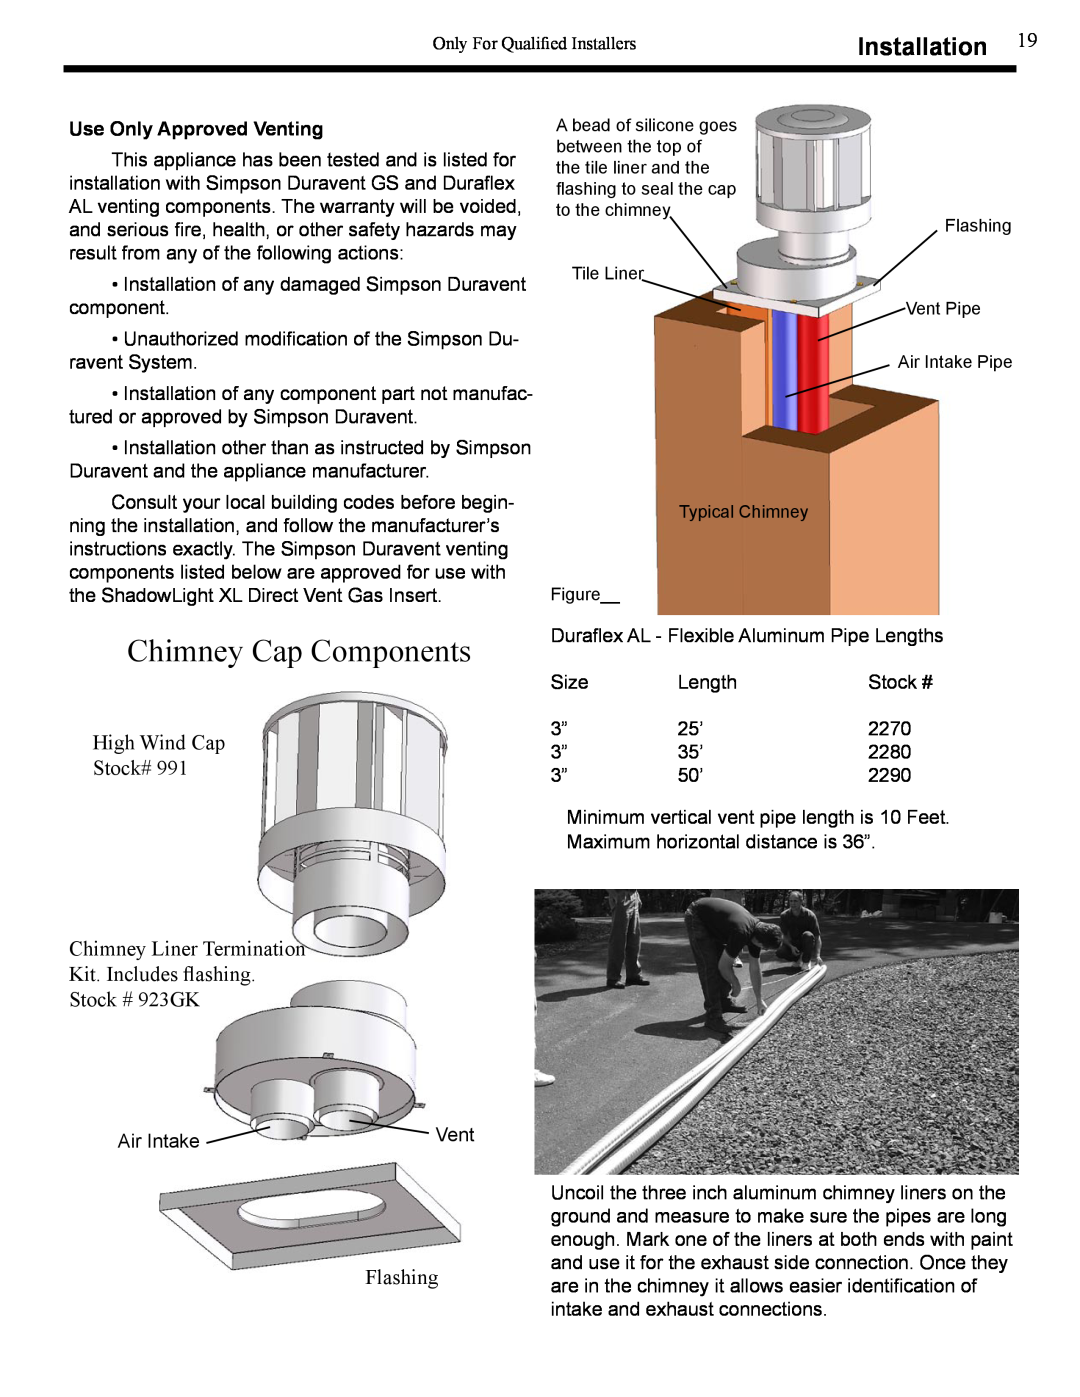 Harman Stove Company XL Chimney Cap Components, High Wind Cap Stock#, Flashing, Installation, Use Only Approved Venting 